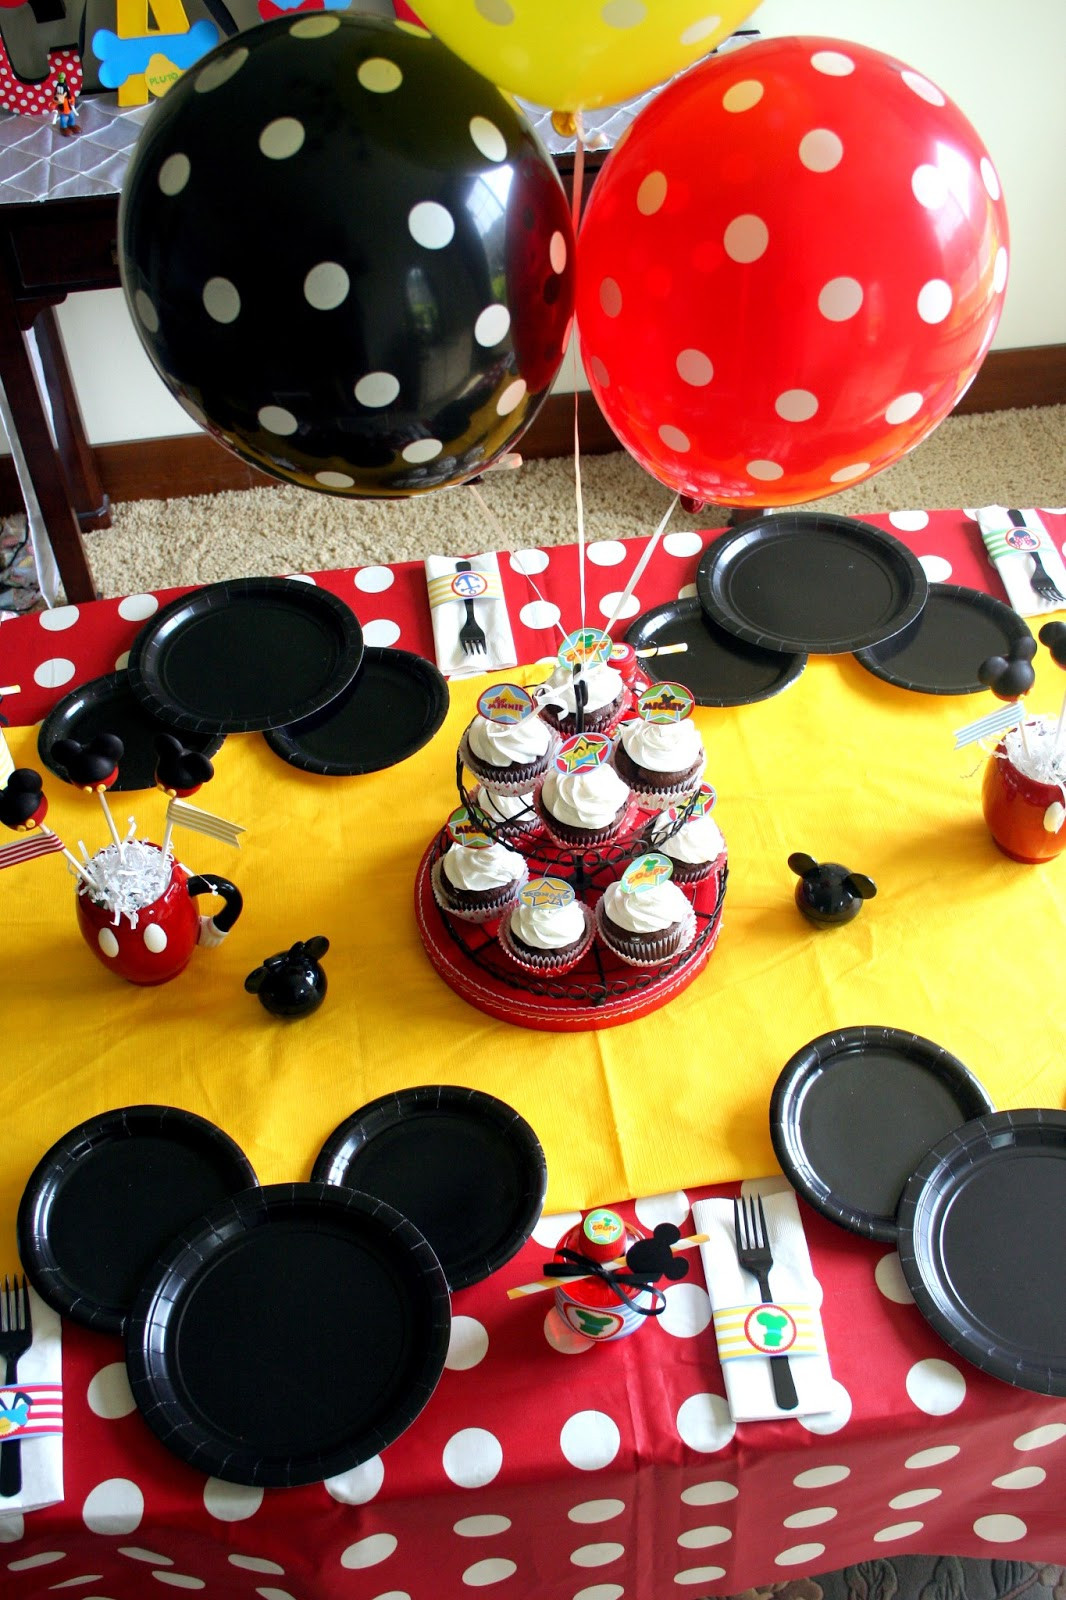 Mickey Mouse Birthday Party Decorations
 The Carver Crew A VERY MICKEY BIRTHDAY